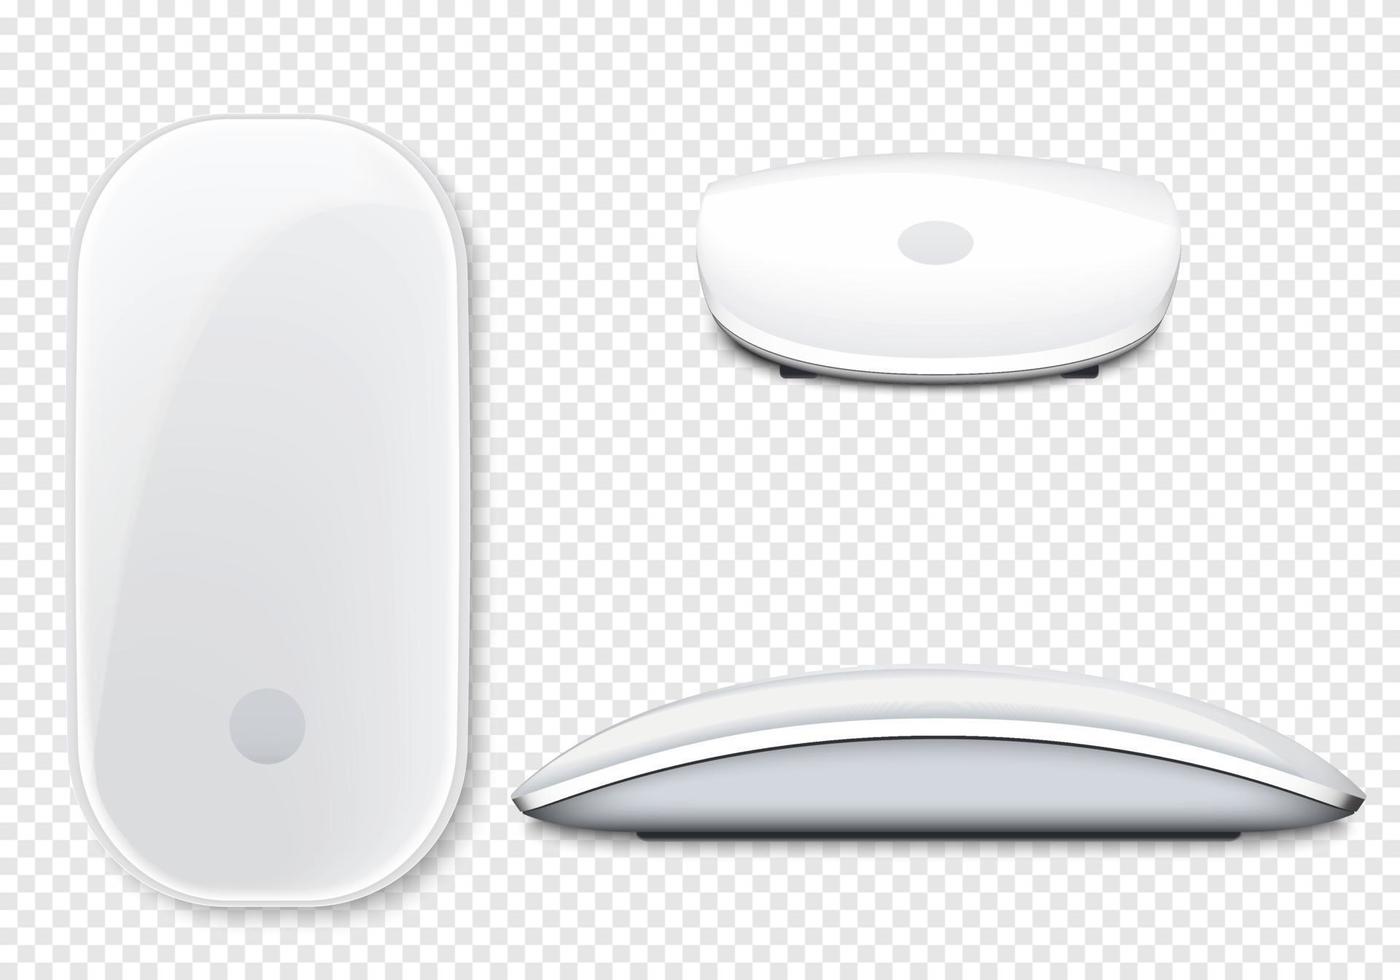 Realistic white wireless mouse isolated. Device for control laptop. Object for use computer desktop or notebook. Mobile device technology. Digital gadget for office working, education, learning. vector